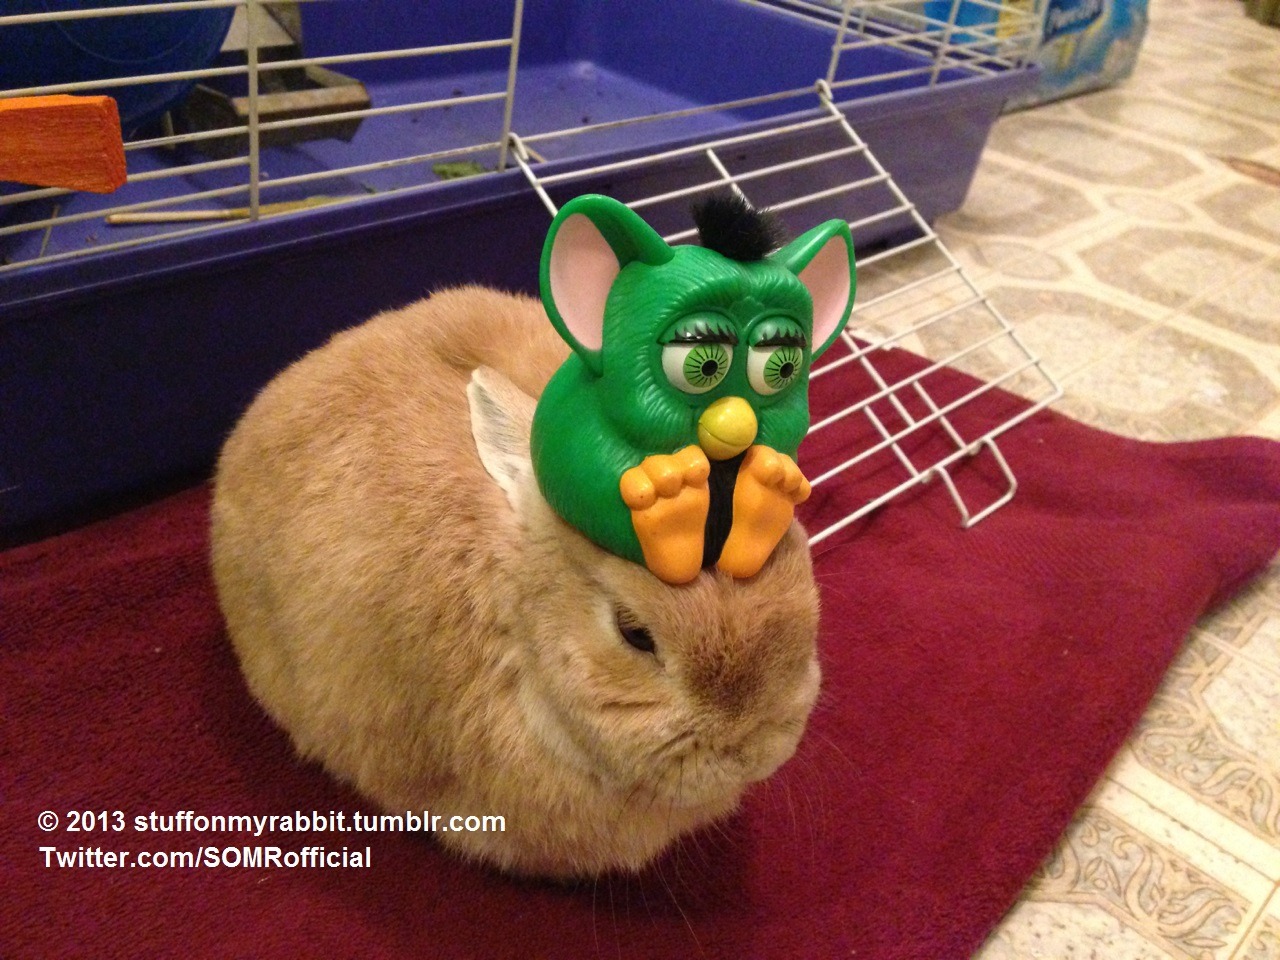 Vinnie the bunny with a furby toy on his head